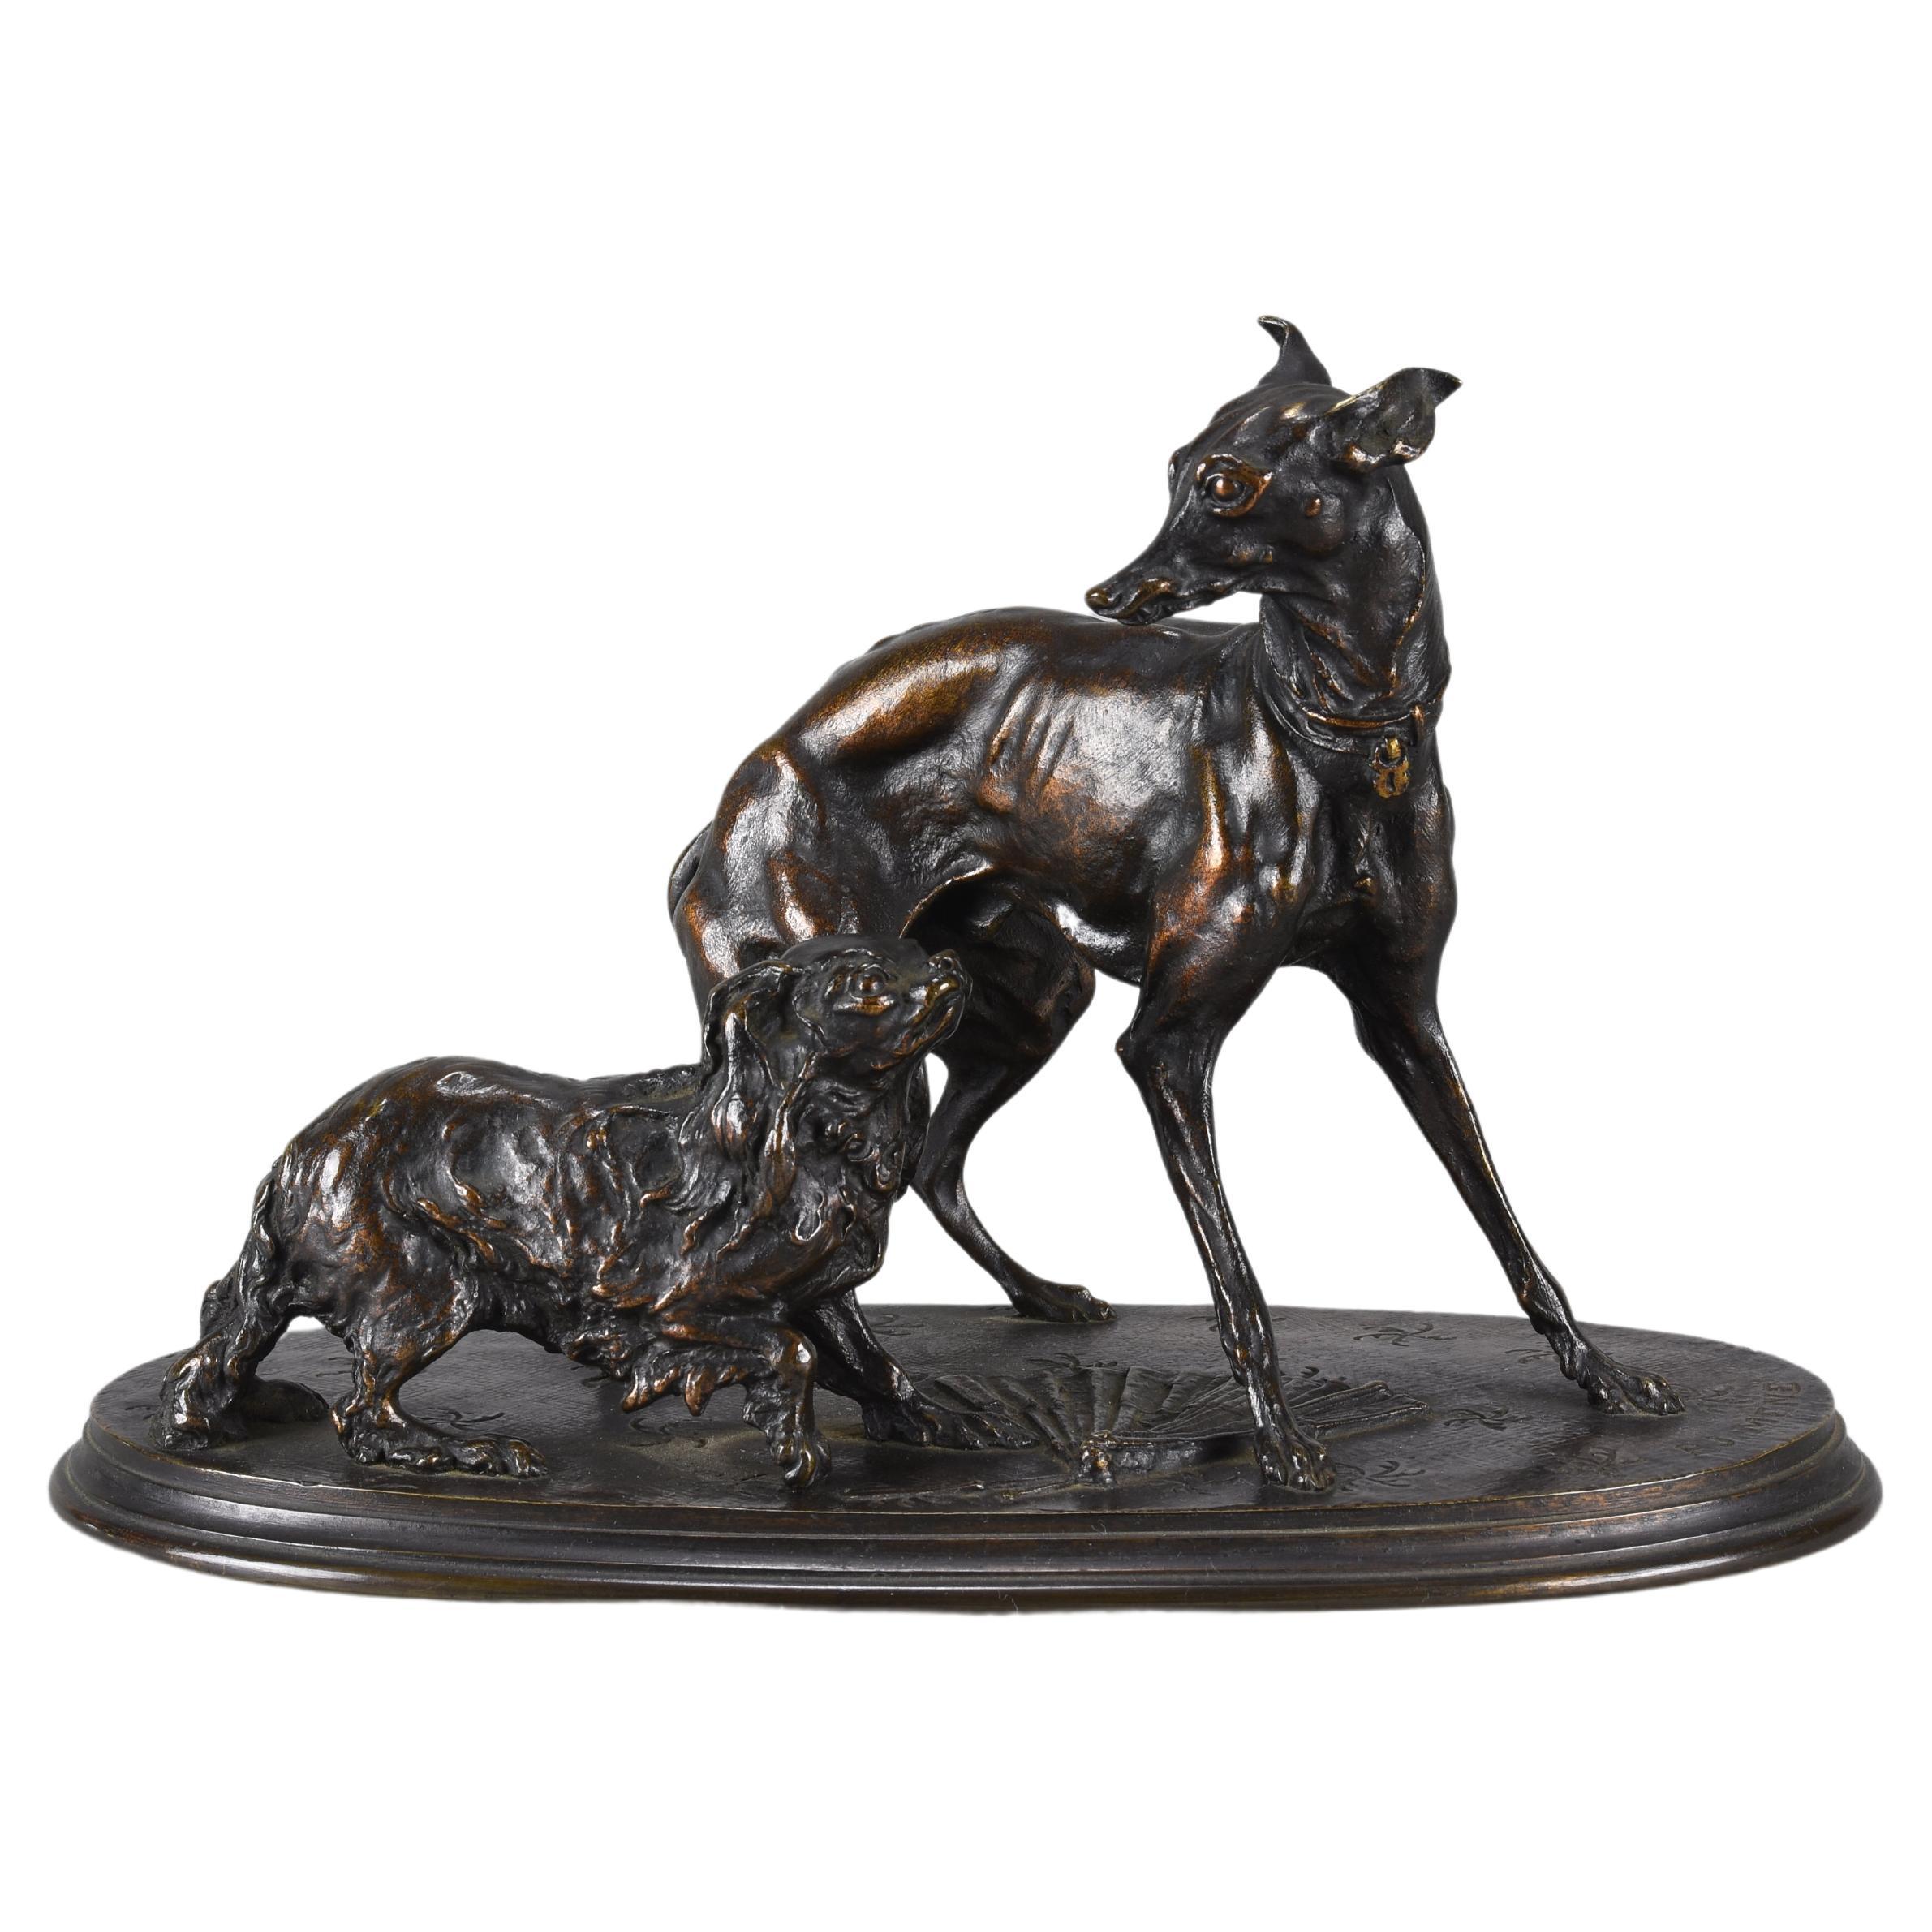 Anamilier Bronze Entitled "Greyhound and King Charles Spaniel" by P J Mêne For Sale